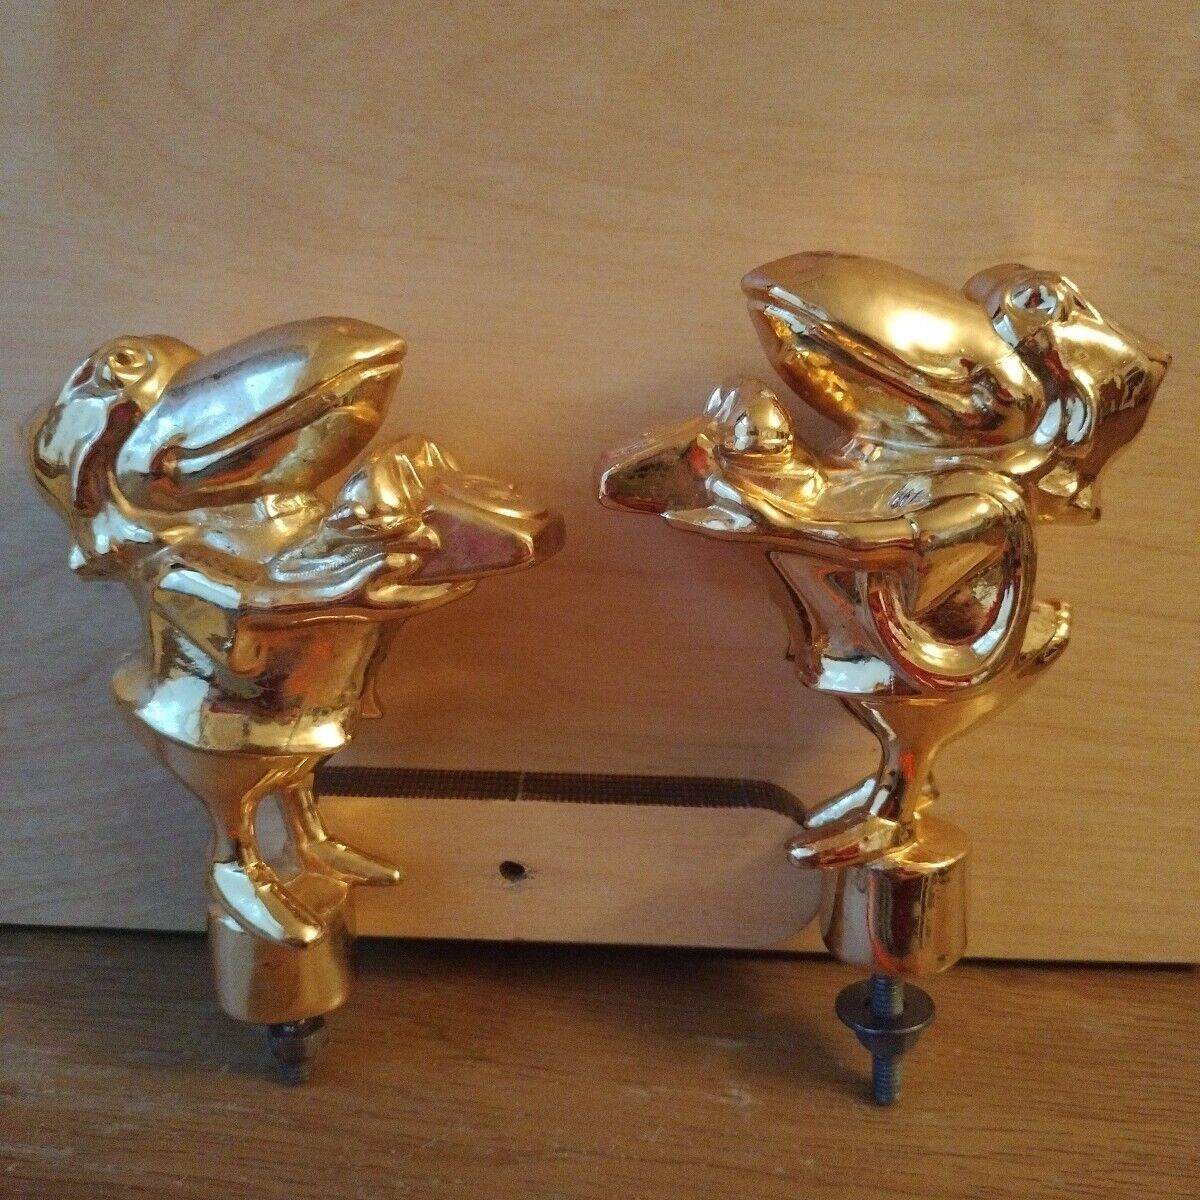 Antique Solid Brass Banister Finials From JAYHAWK TELEPHONE TOWER Topeka Kansas